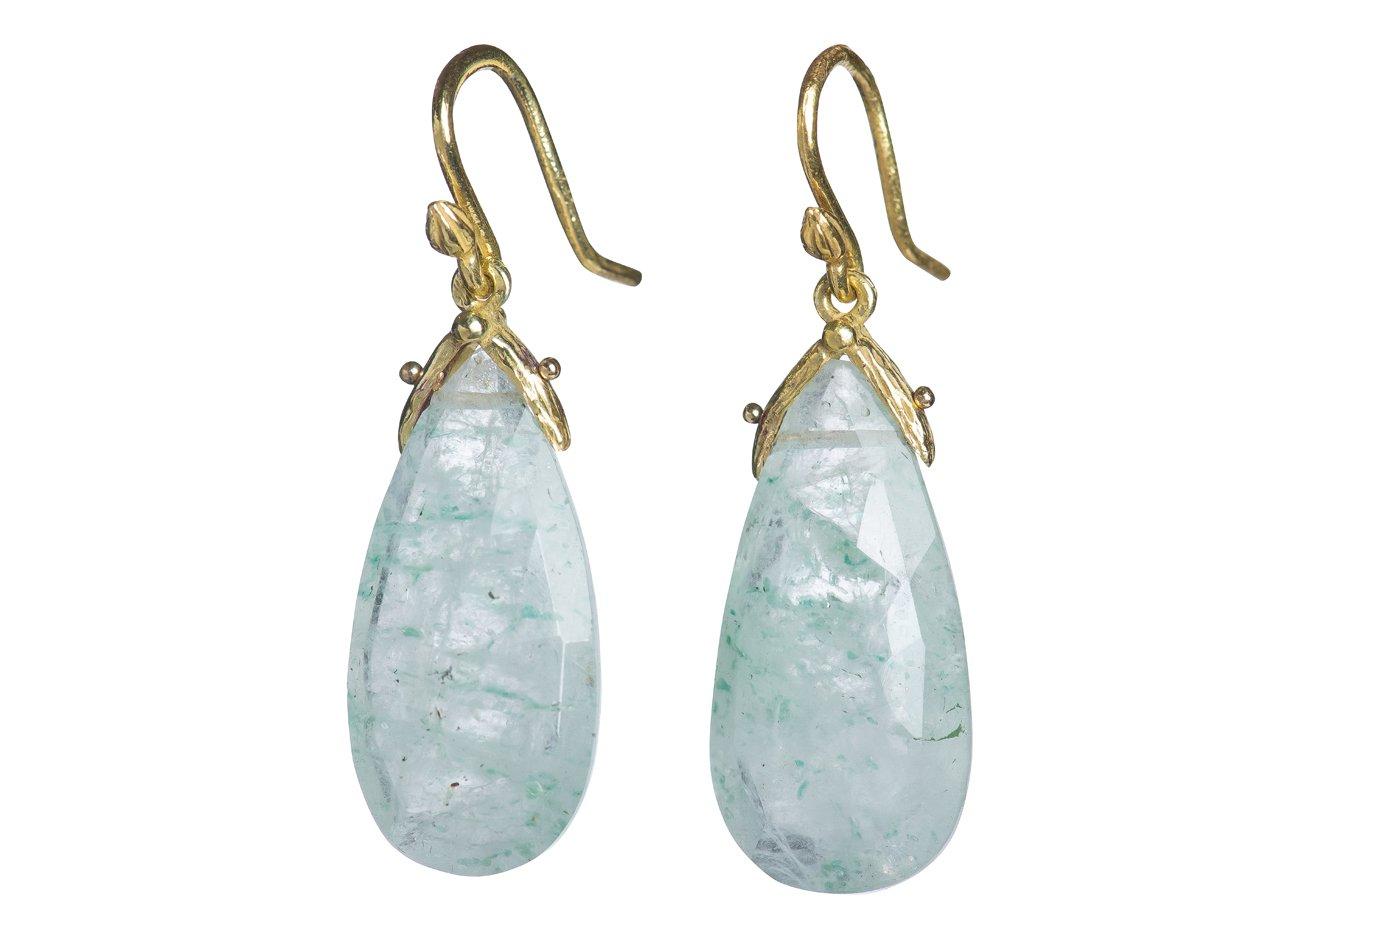 Wear a breath of fresh air at your ears with these naturally spotted 23x11mm faceted green agate teardrops, set in 18k double-seed setting, and hanging from single-seed earwires.

Naturally green spotted faceted grapolite teardrop 18k med doube seed